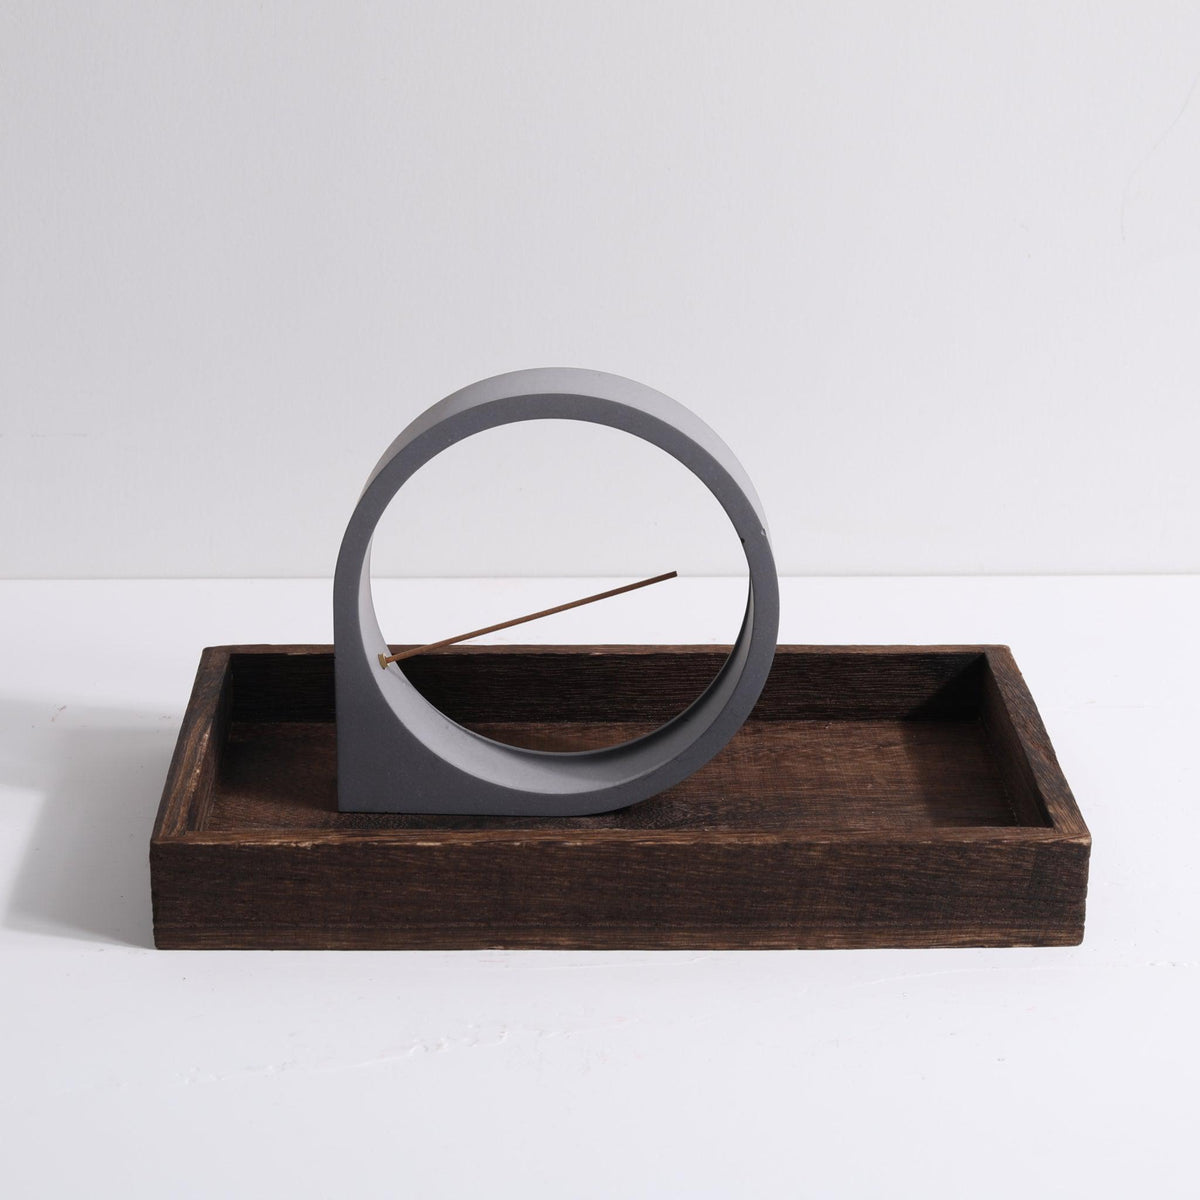 Front view of smaller Moon incense holder by Kin Objects on wooden tray